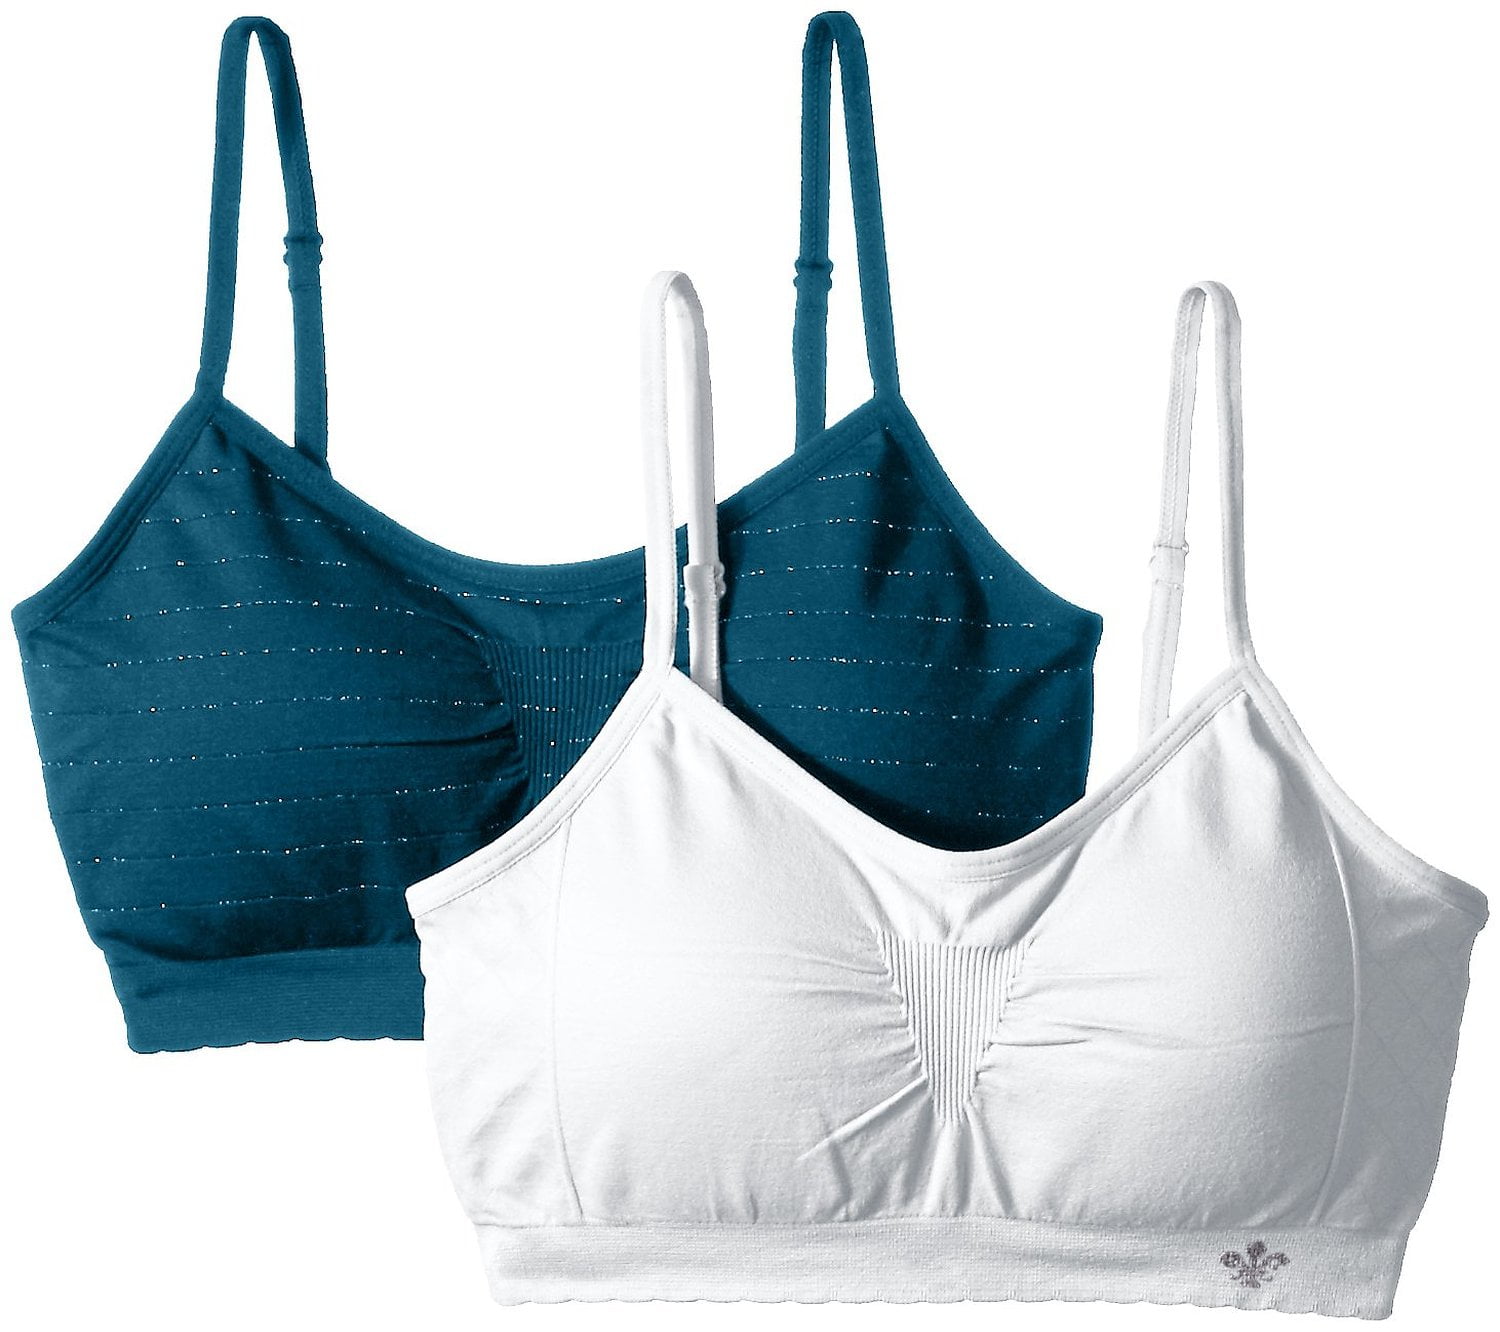 Lily of France® 2-pk. Seamless Comfort Bralettes - 2171941